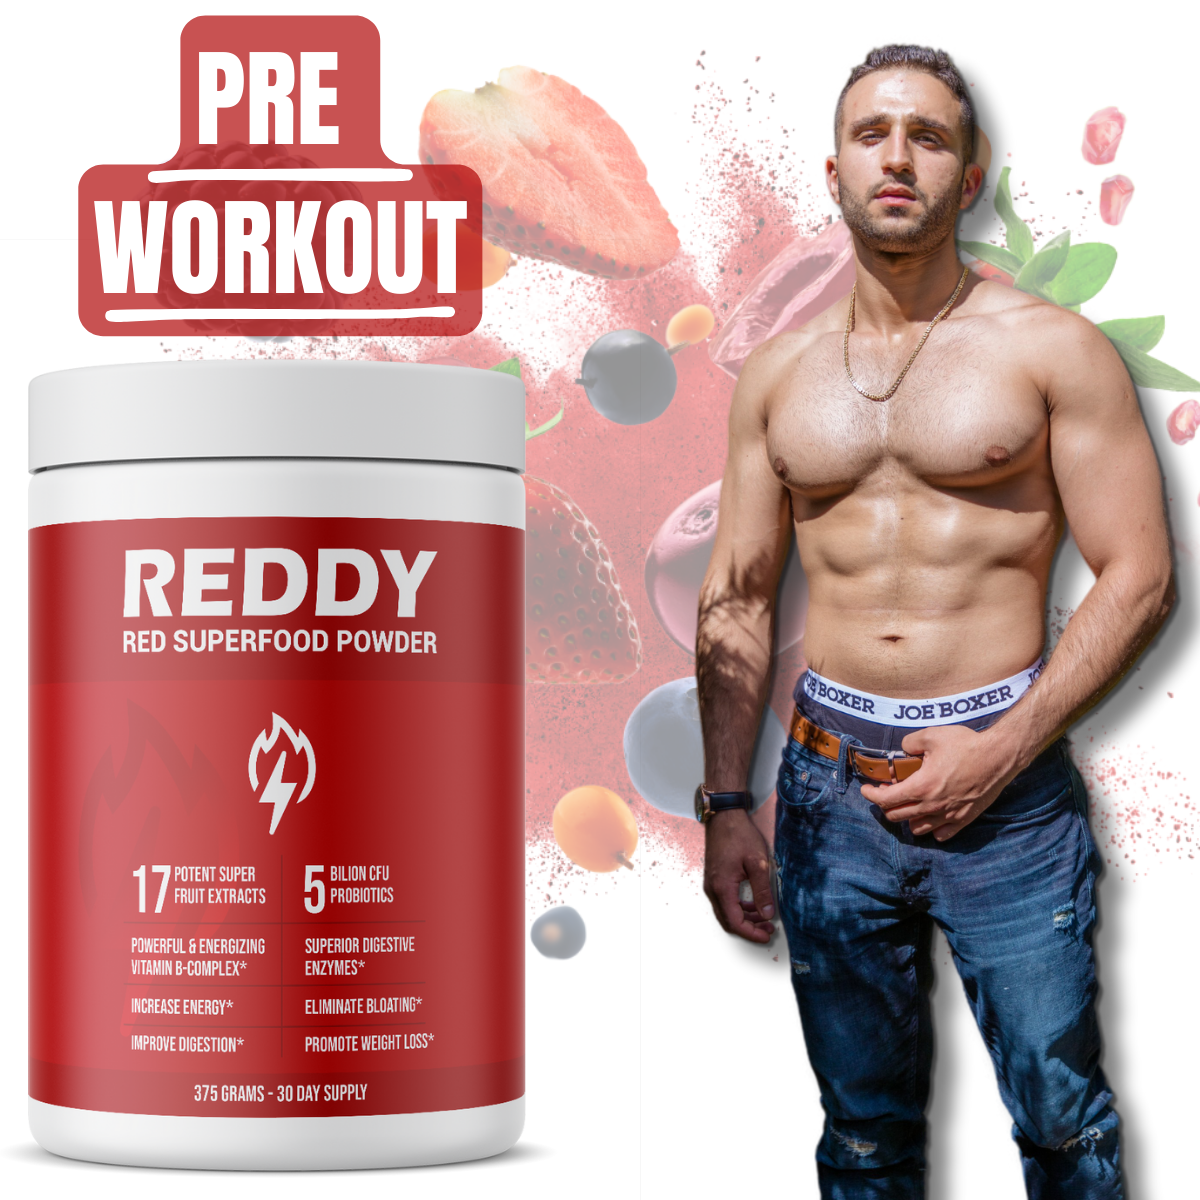 Unleash Your Peak Performance: Reddy as Your Ultimate Pre-Workout Game Changer